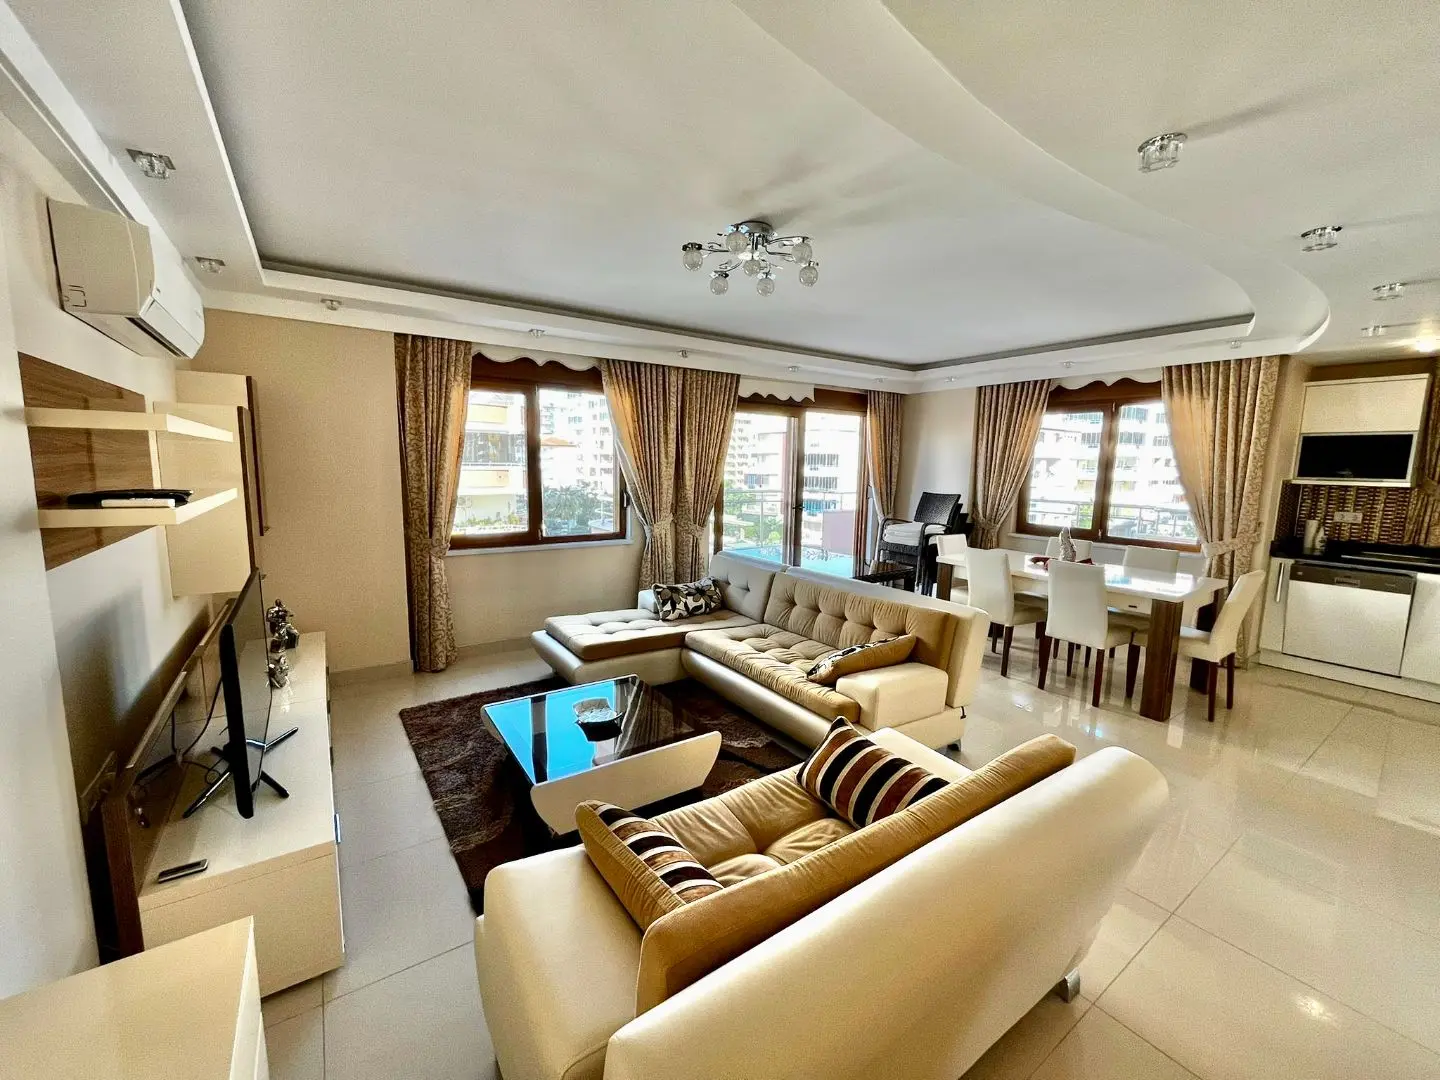 2+1 FURNISHED FLAT IN ALANYA MAHMUTLAR, ONLY 150 M AWAY FROM THE SEA